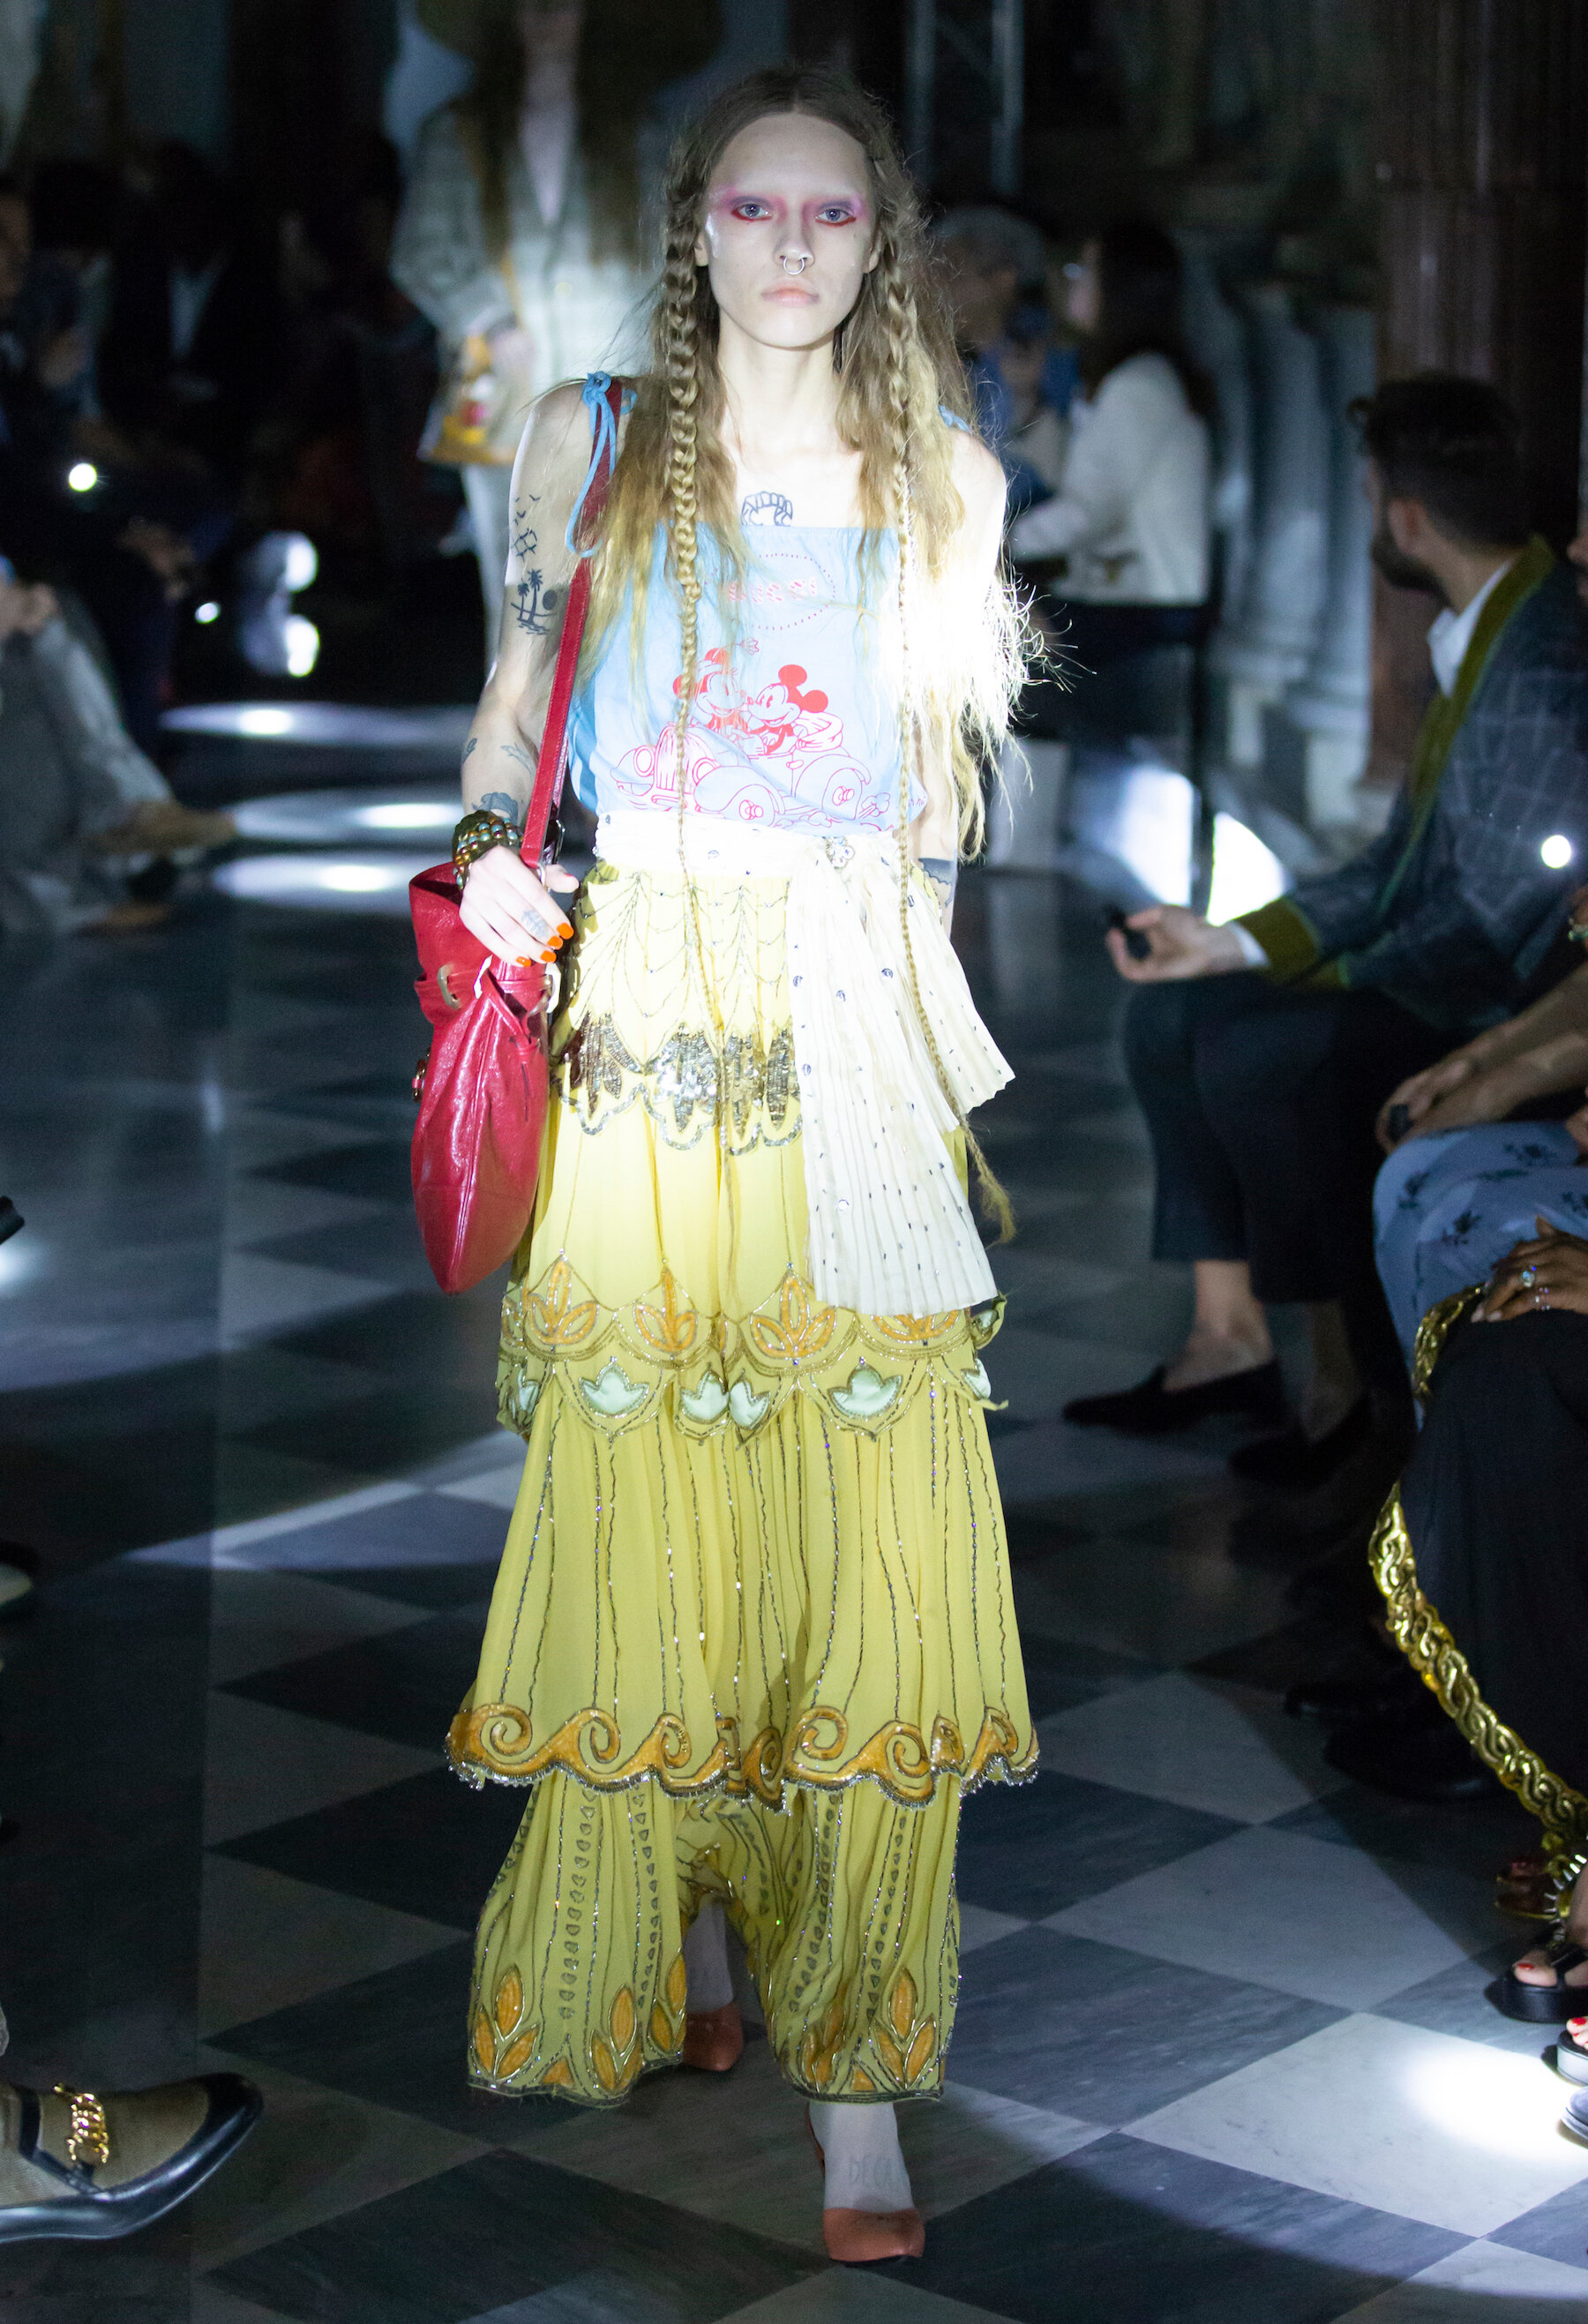 Gucci Cruise 2020 Collection (Look 3).jpg